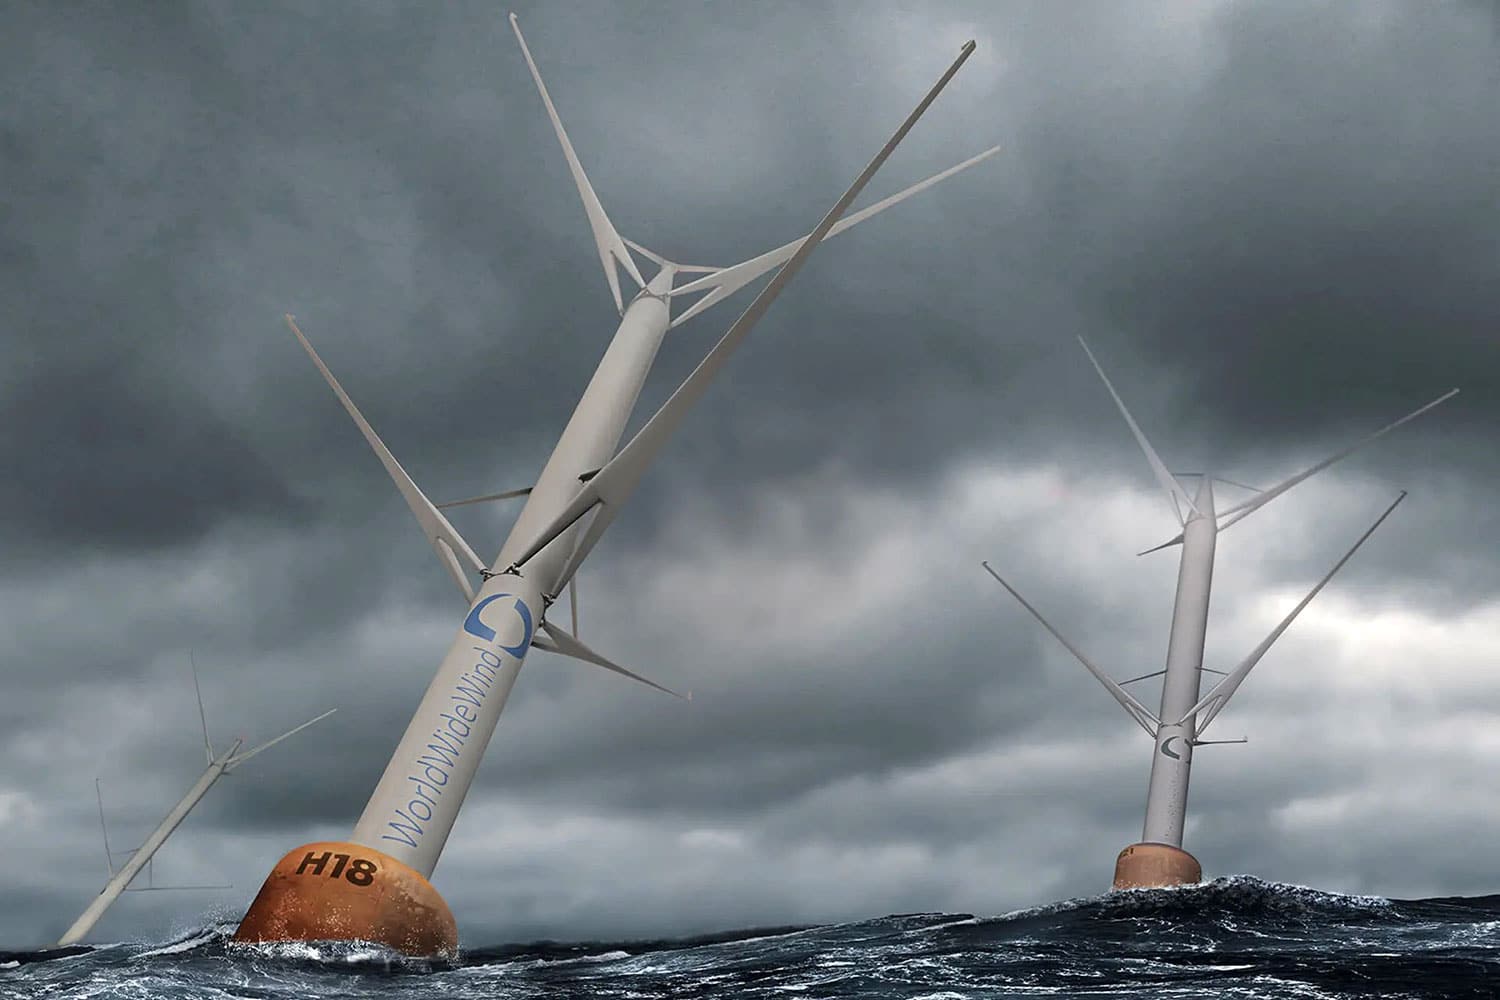 Floating contra-rotating wind turbine delivers twice the energy of today's largest turbines.